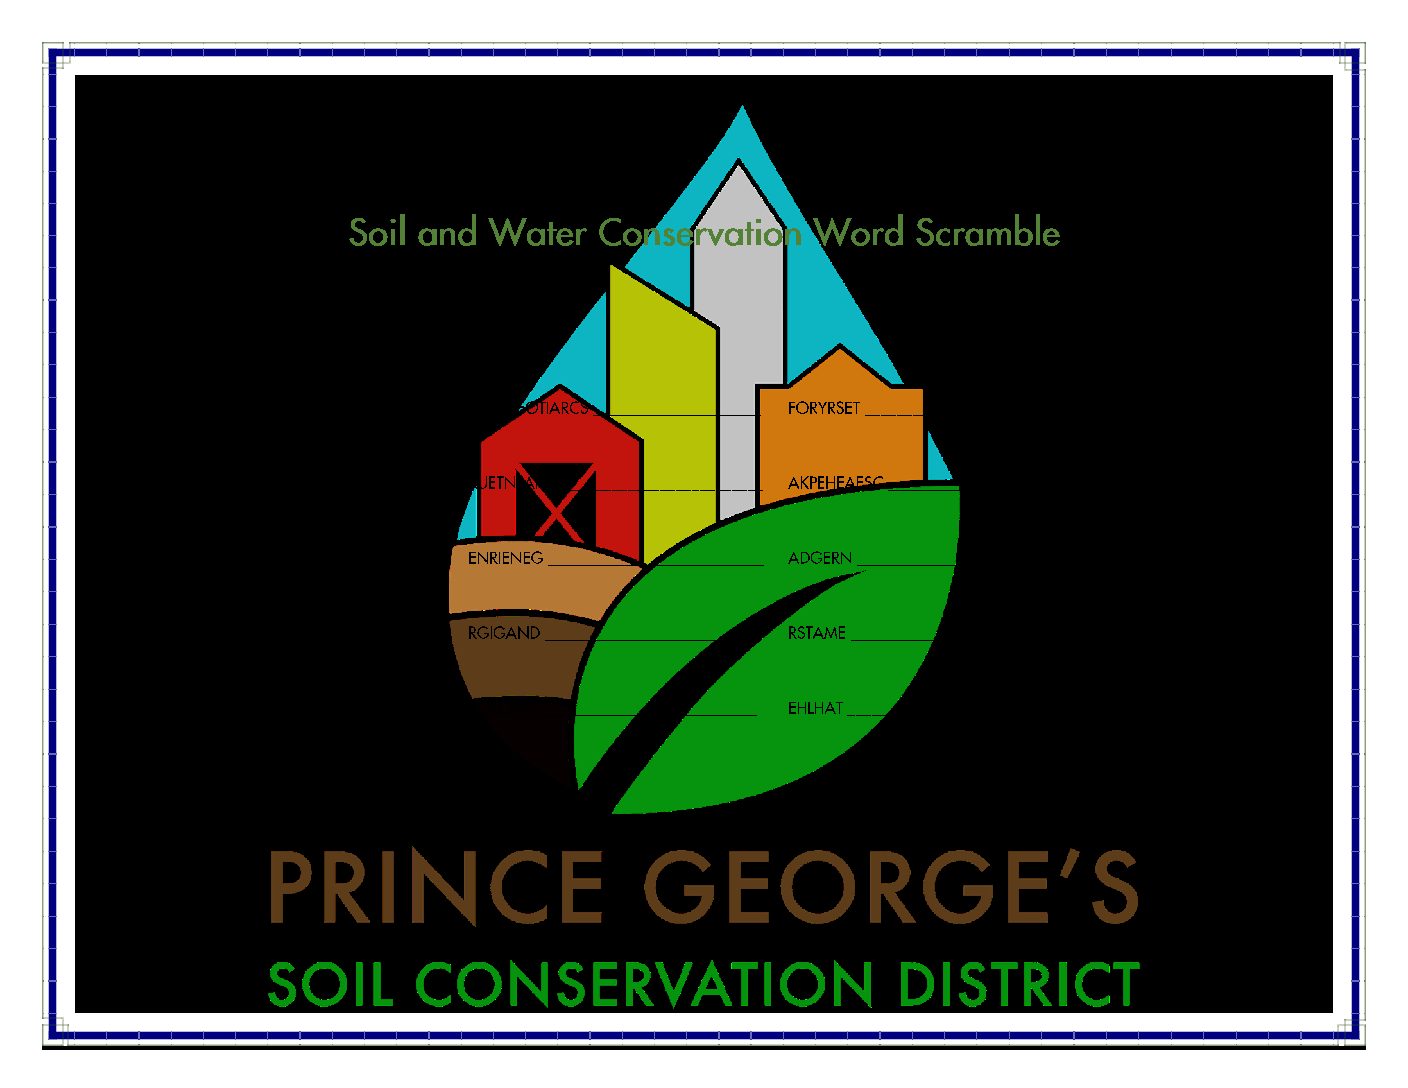 2020-earth-day-word-scramble-and-word-search-prince-george-s-soil-conservation-district